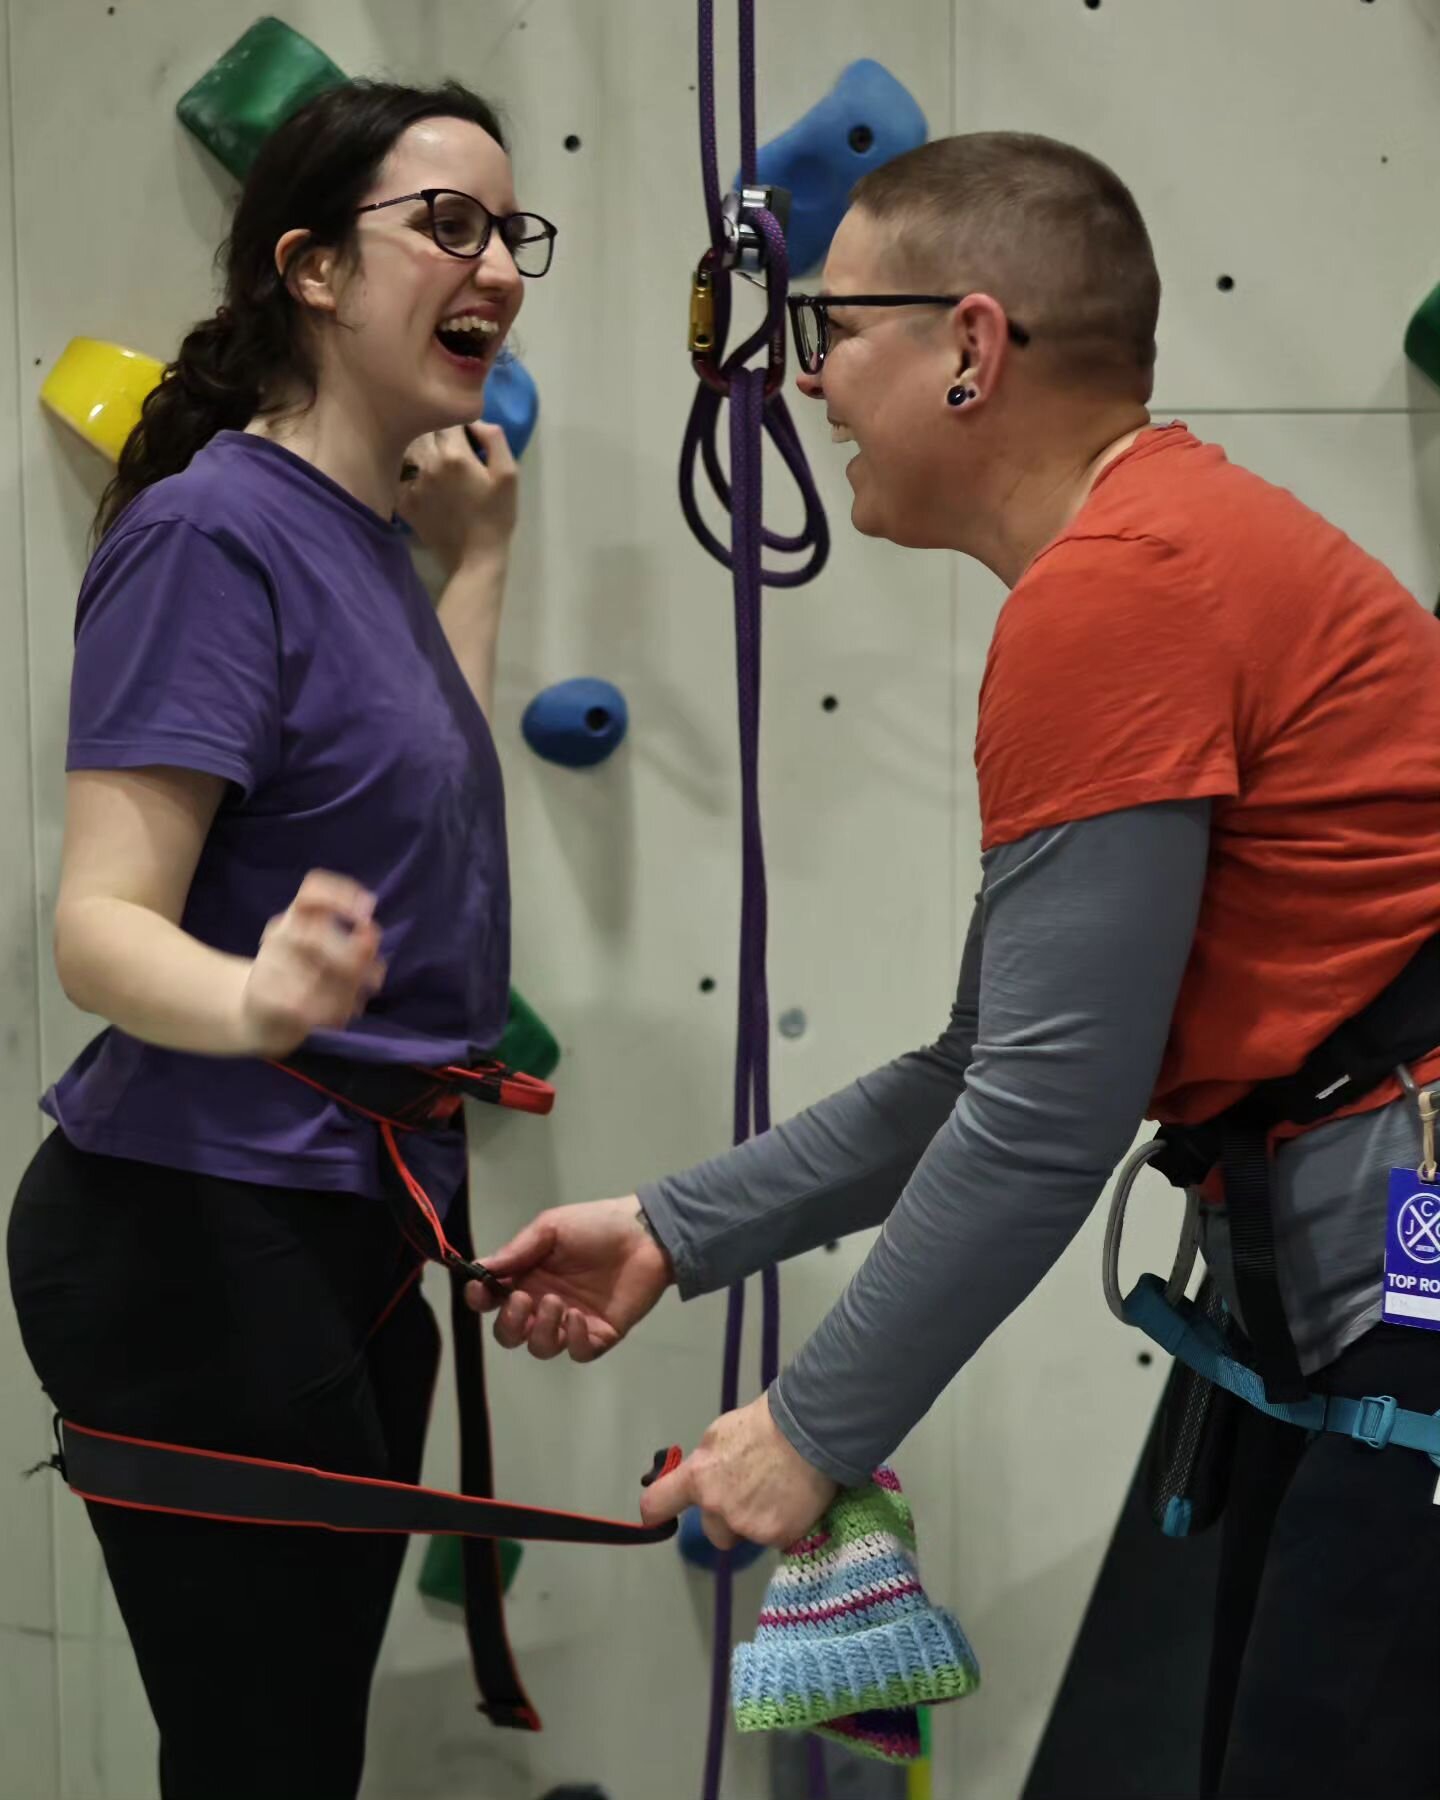 Smiles, sends, and teamwork during last night's meetup! It was definitely worth the wait after a long holiday break. 

 ➡️ Want in on the action? (Yeah you do!) Our next climb night is February 24th, and signup is open now!

.
.
.

#adaptiveathlete #